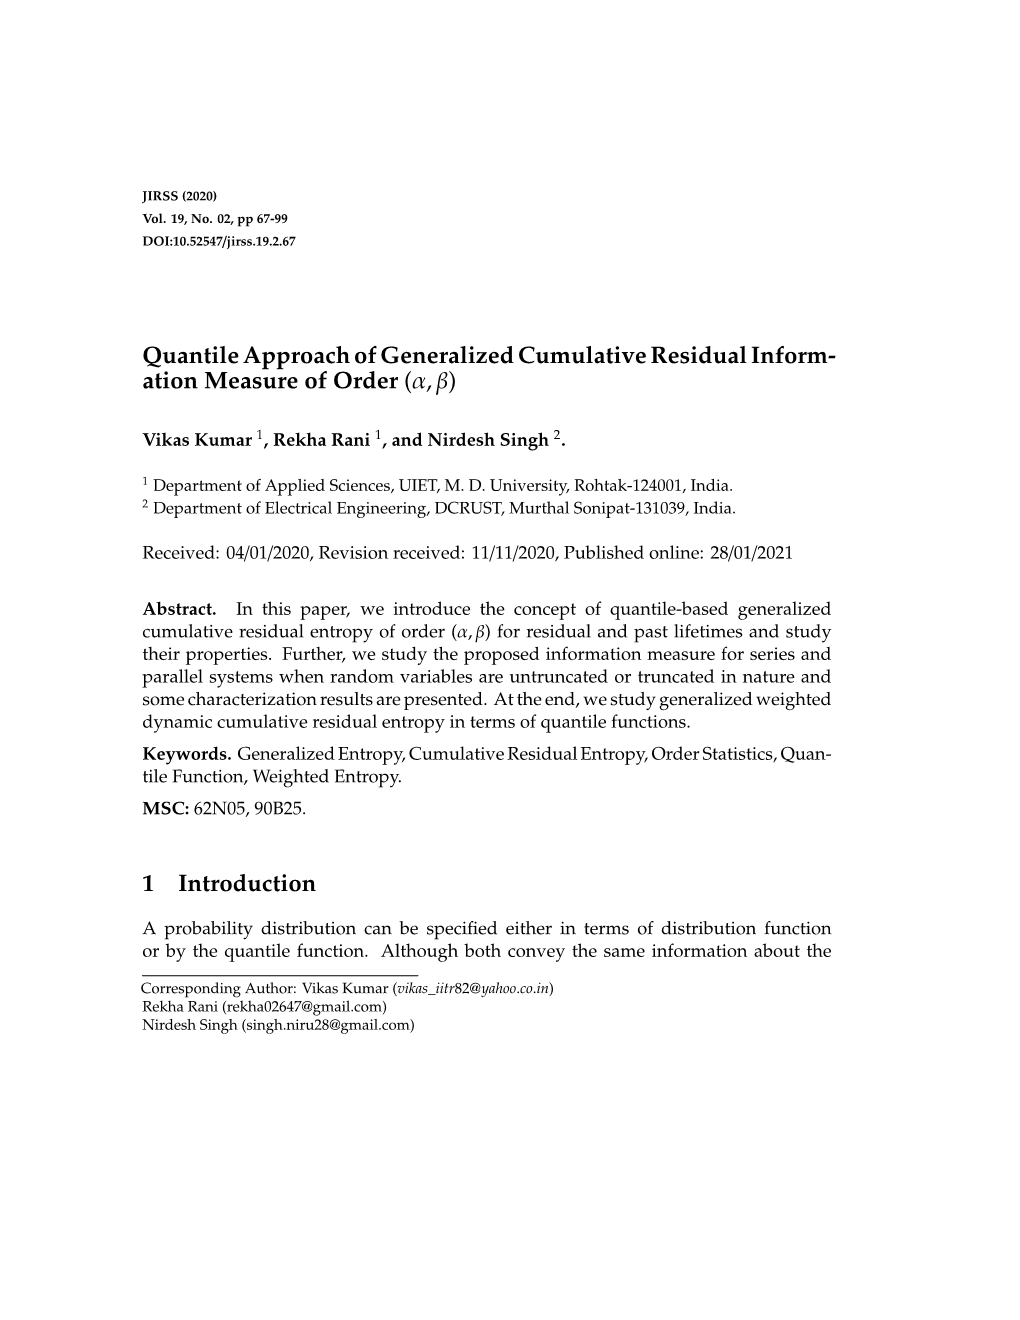 Quantile Approach of Generalized Cumulative Residual Inform- Ation Measure of Order (Α, Β)